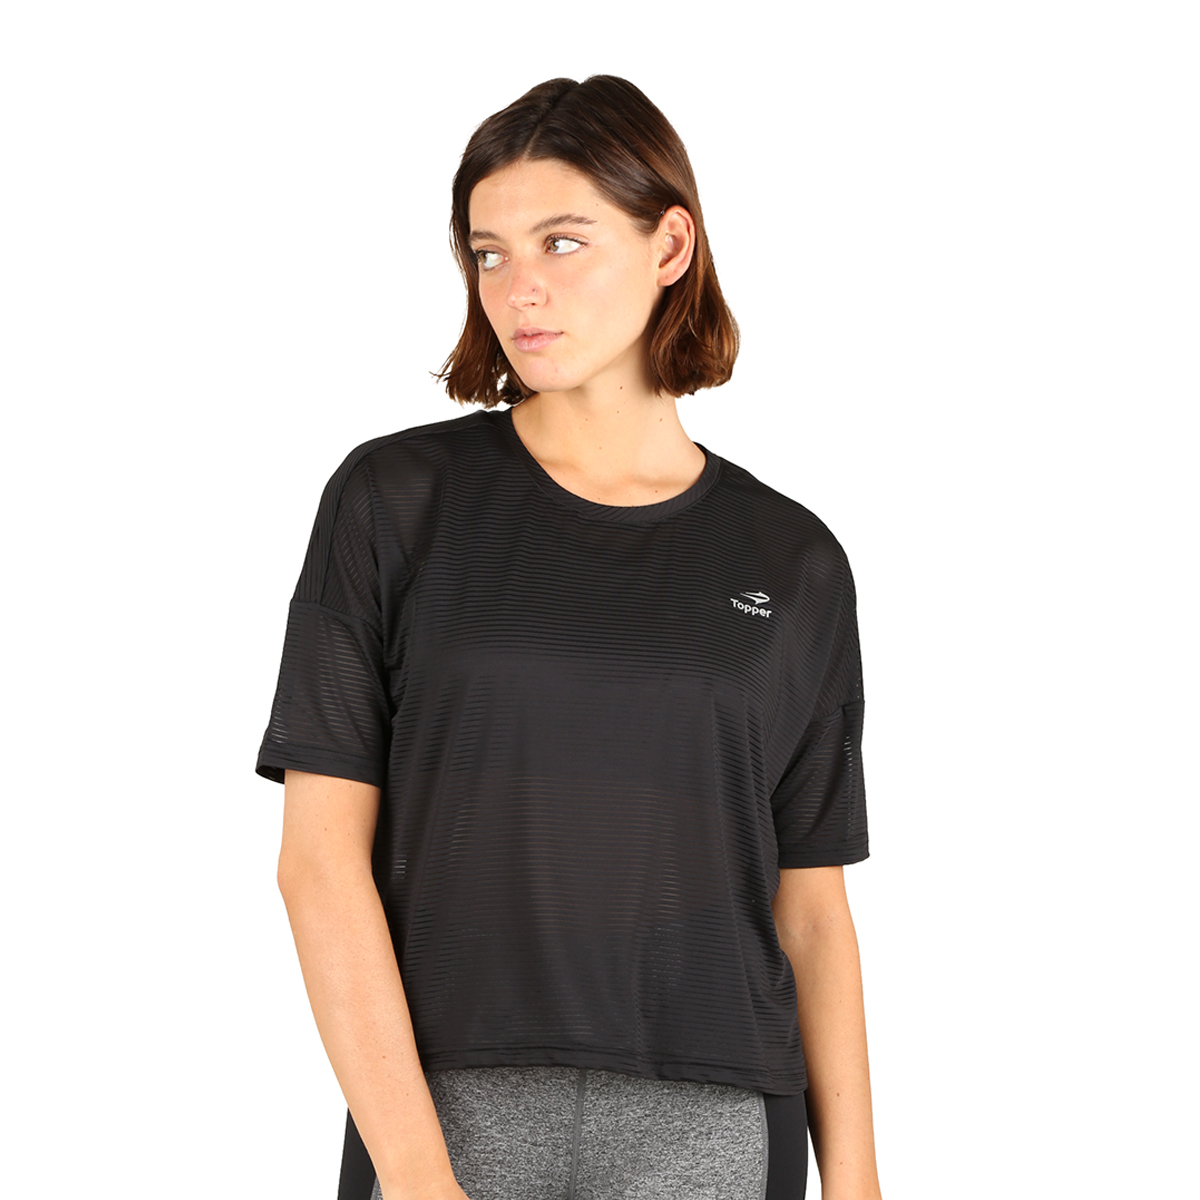 Remera Topper Training Light,  image number null